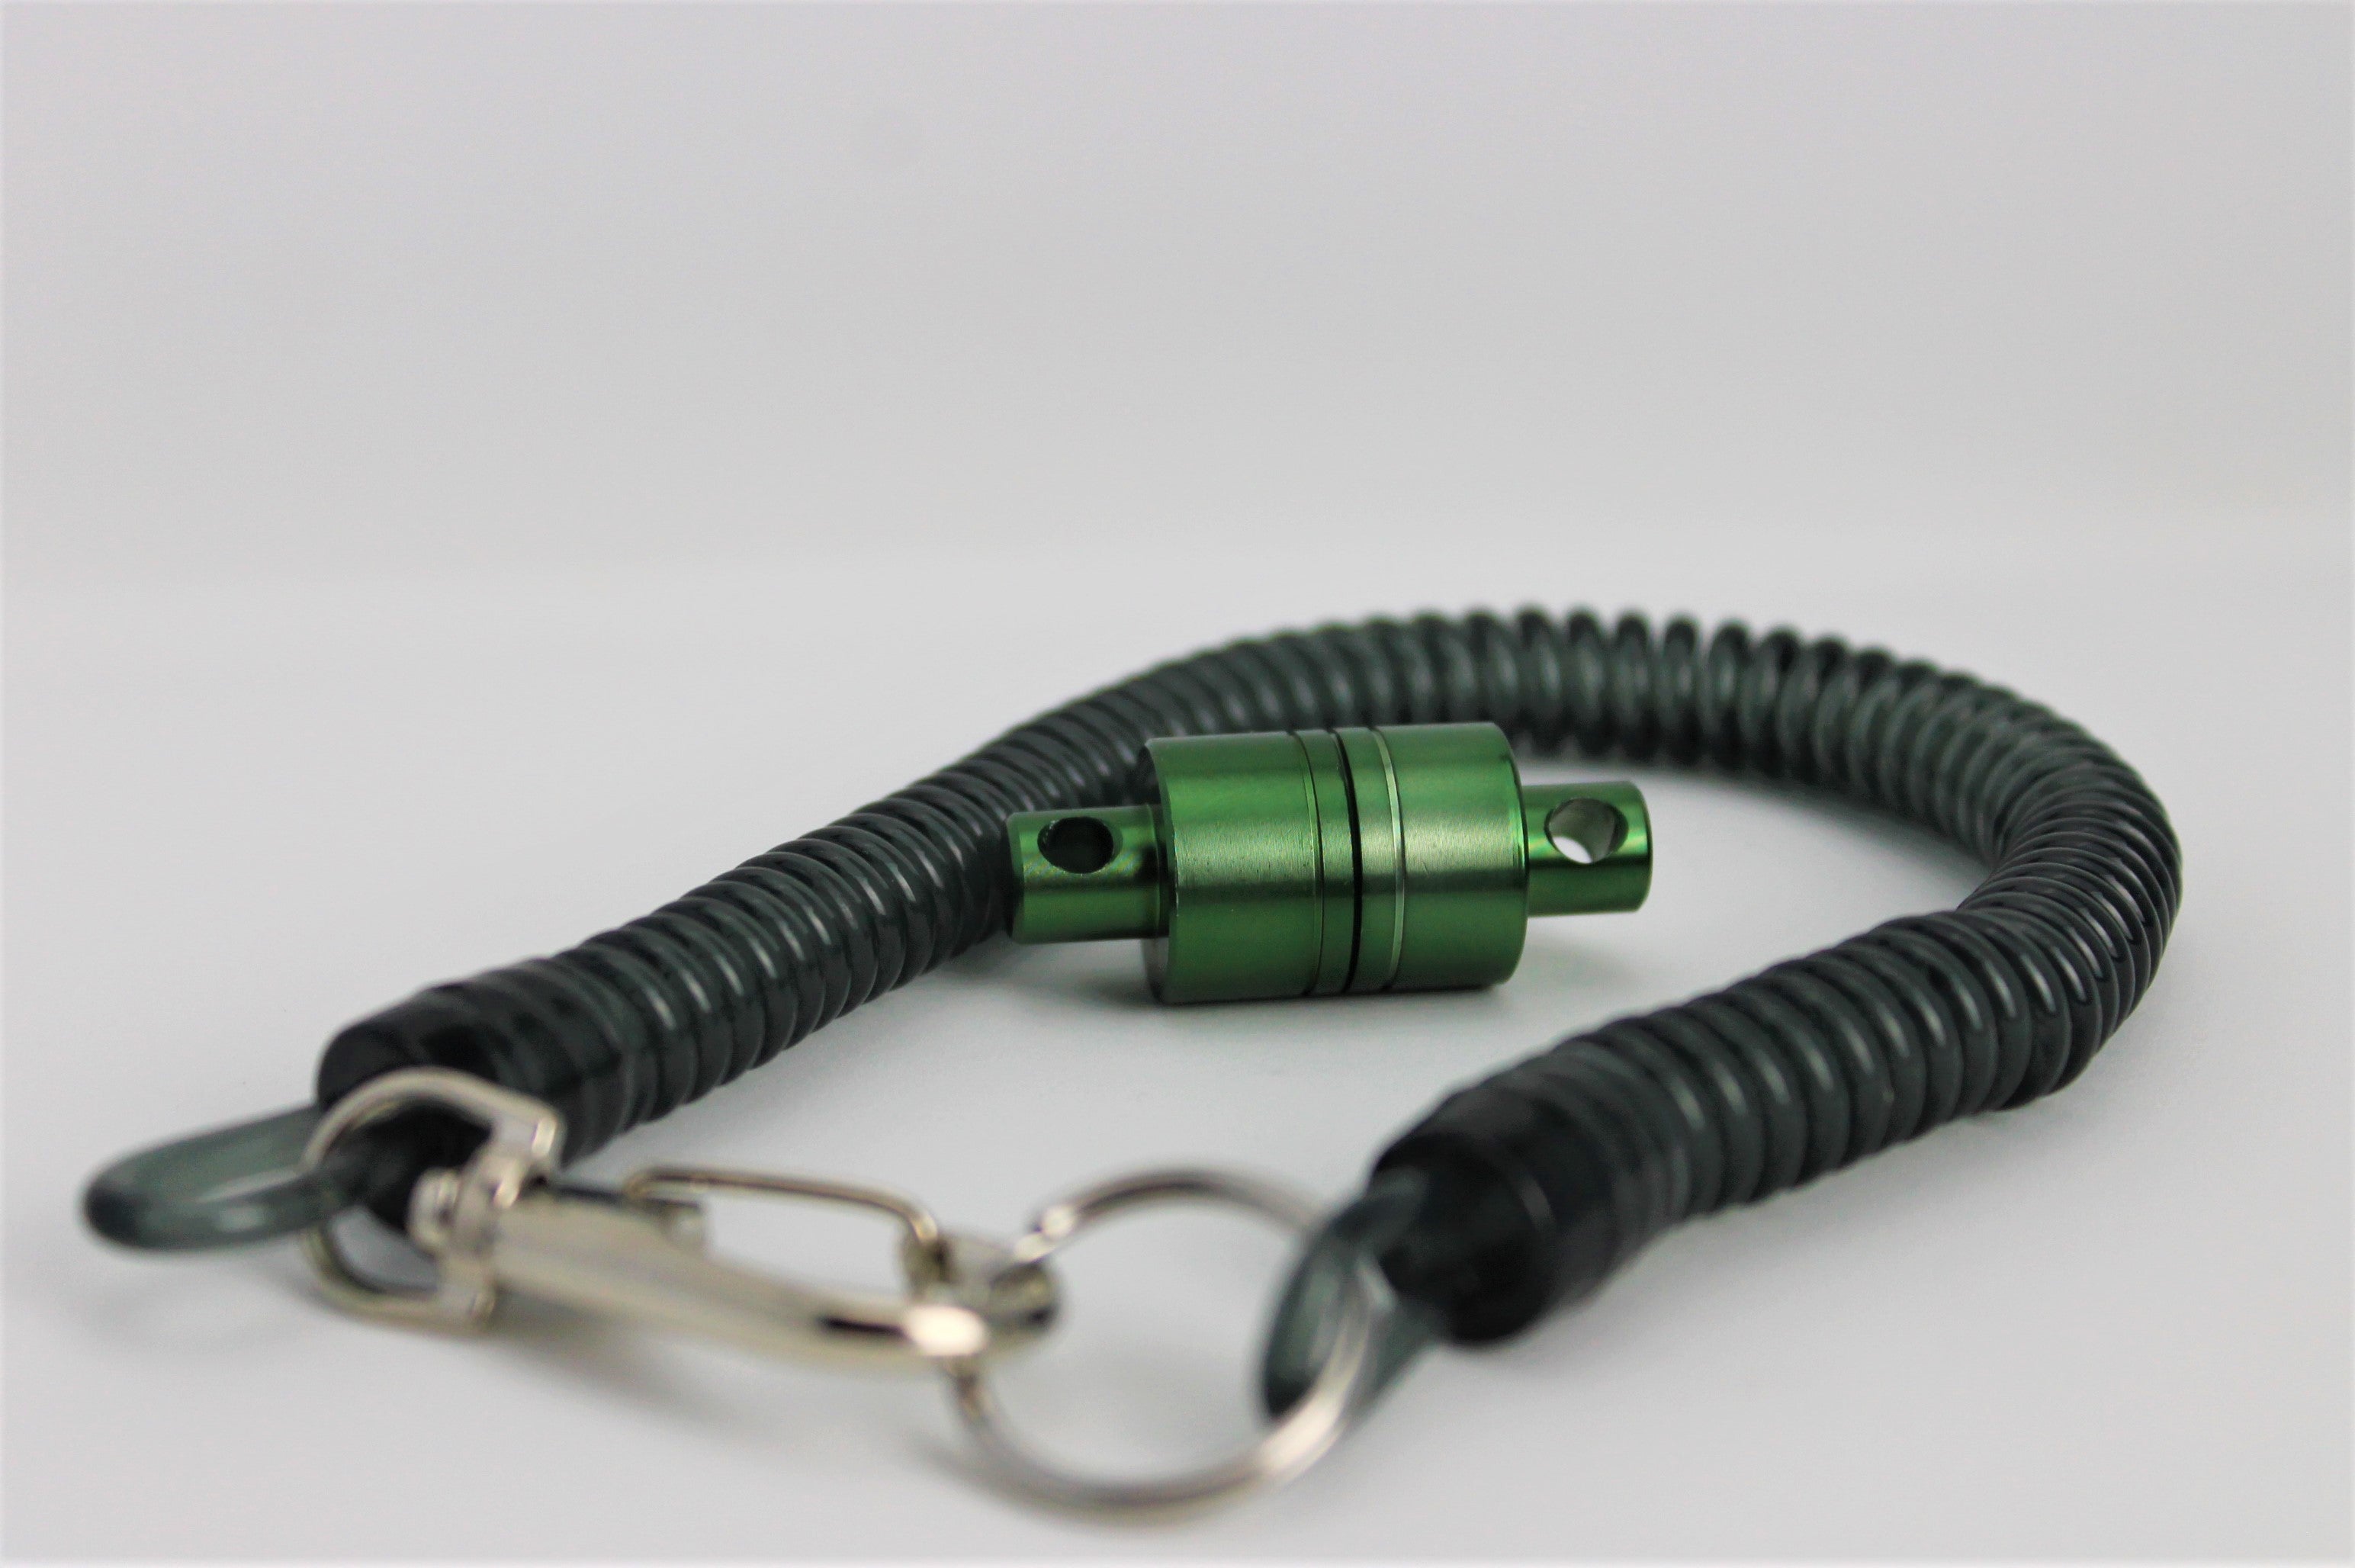 Magnetic Net Release with Lanyard